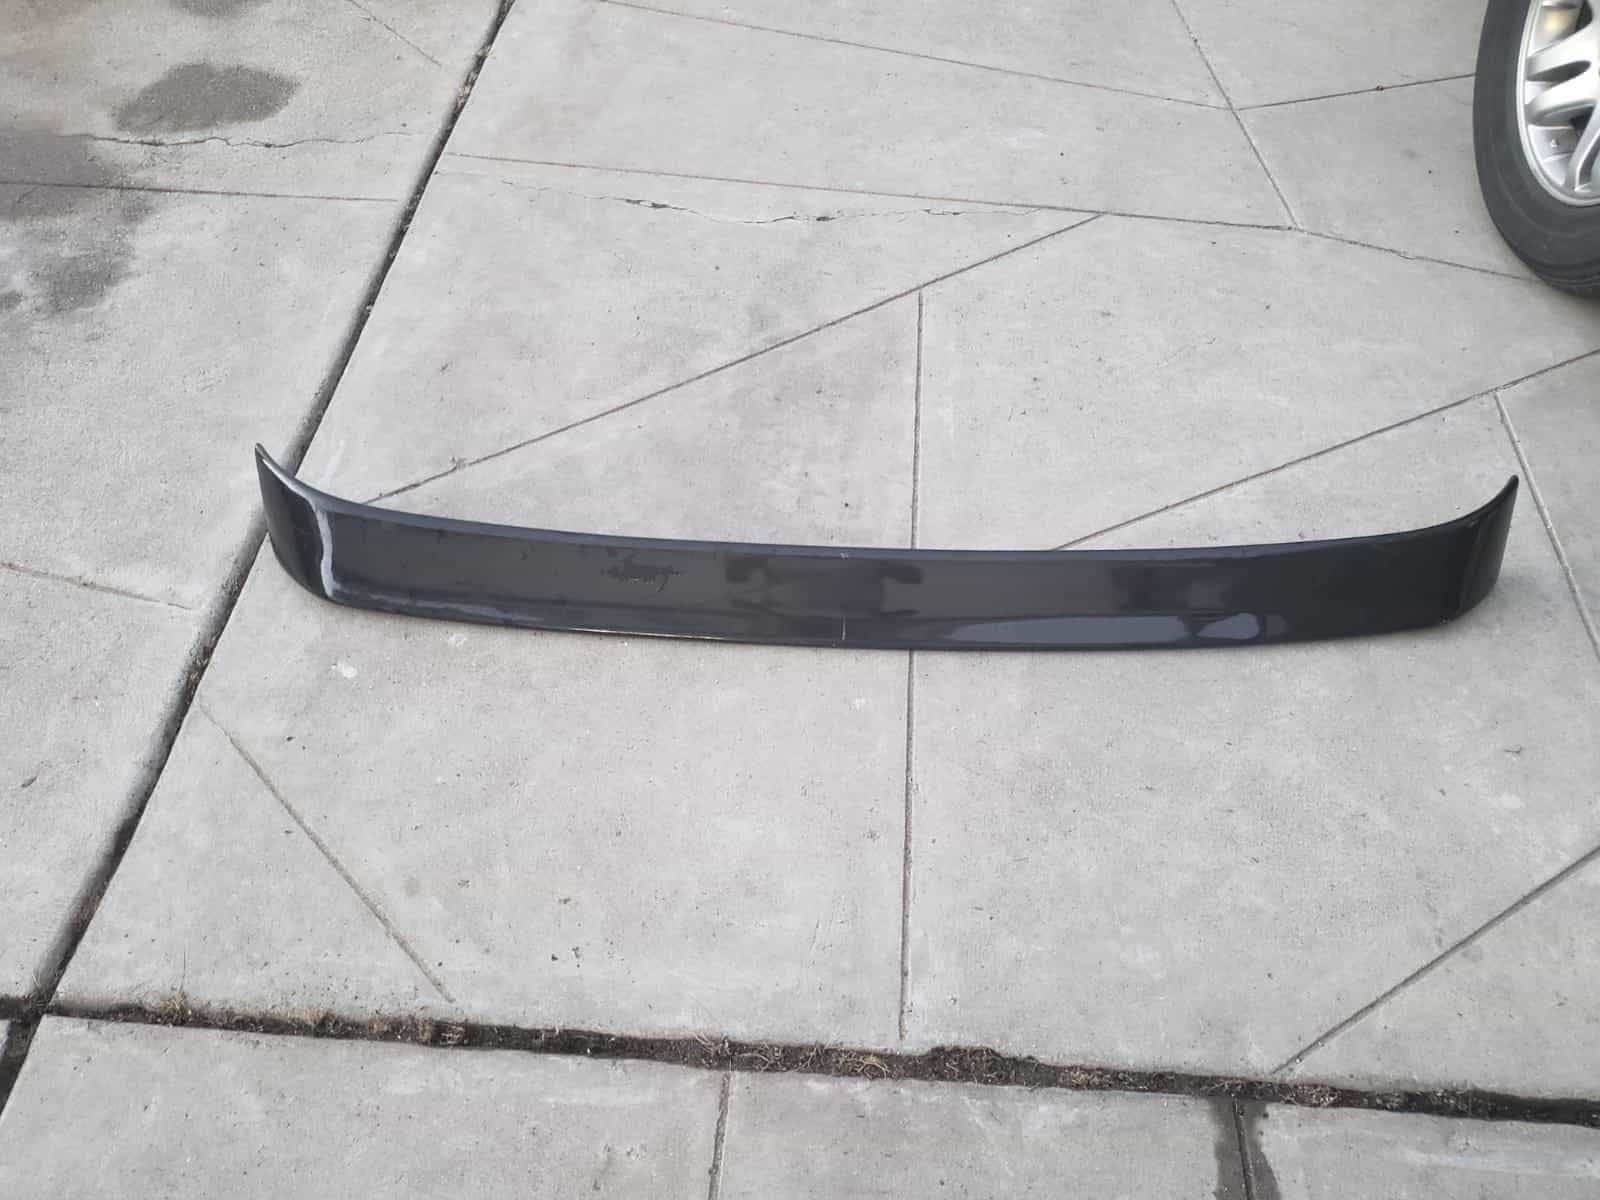 Exterior Body Parts - W126 Wing Black Color - Used - 1989 to 1994 Mercedes-Benz 420SEL - Fremont, CA 94538, United States